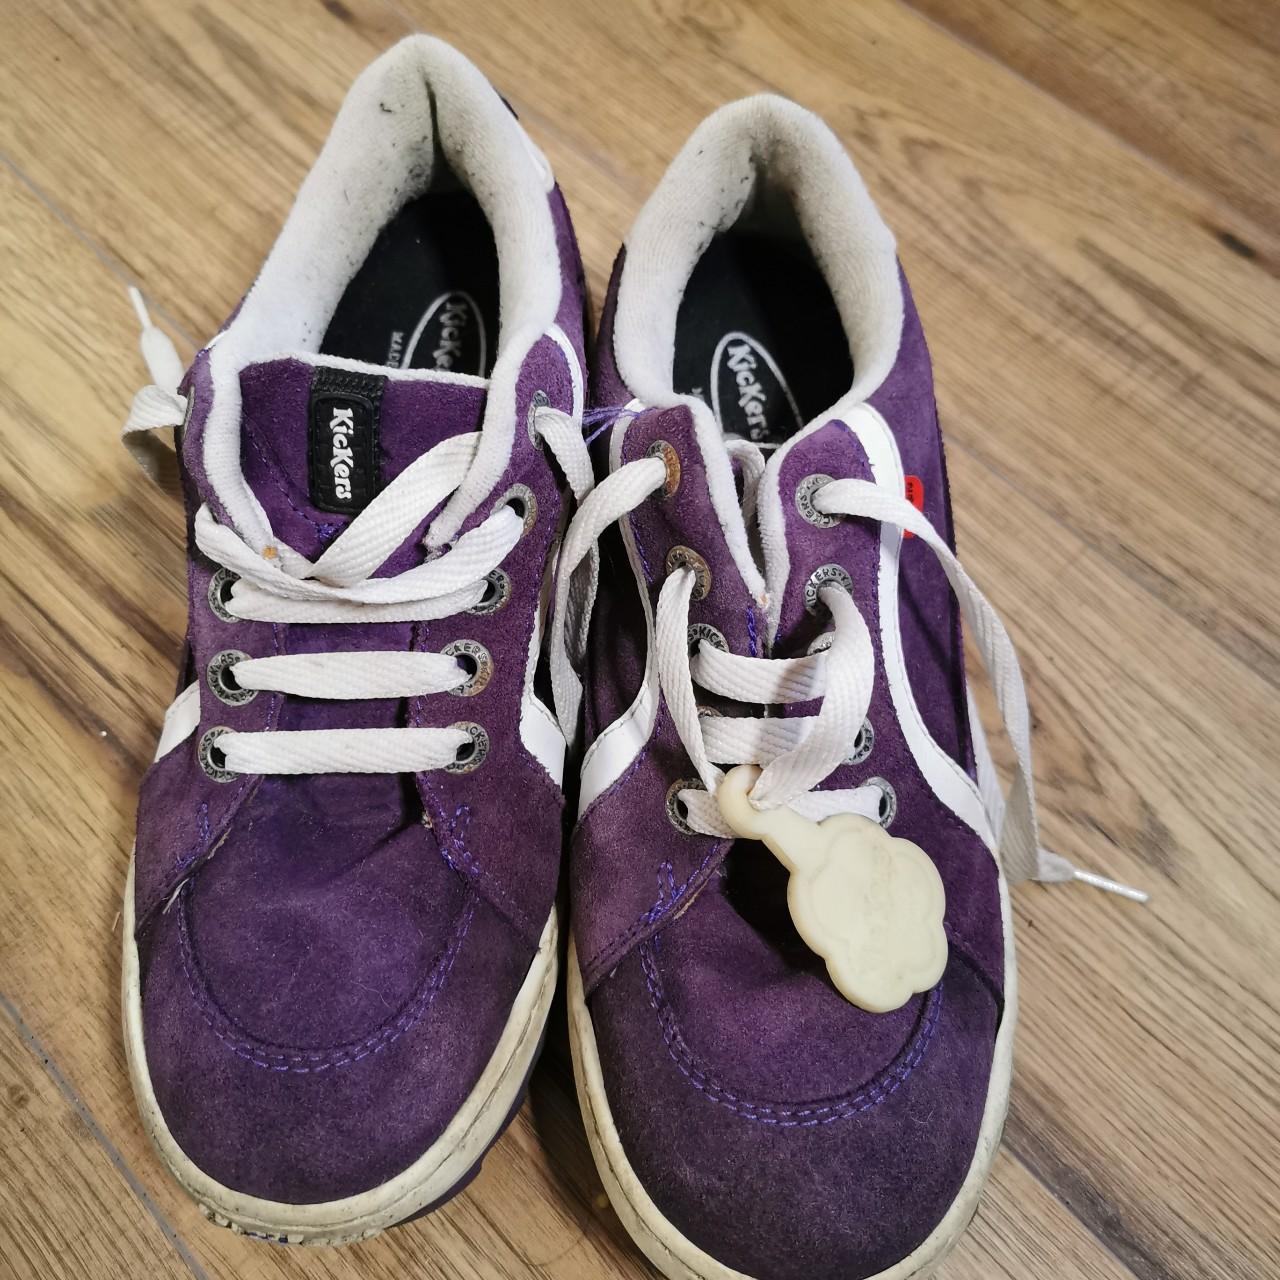 Do not buy! Interest check for these 90s purple... - Depop